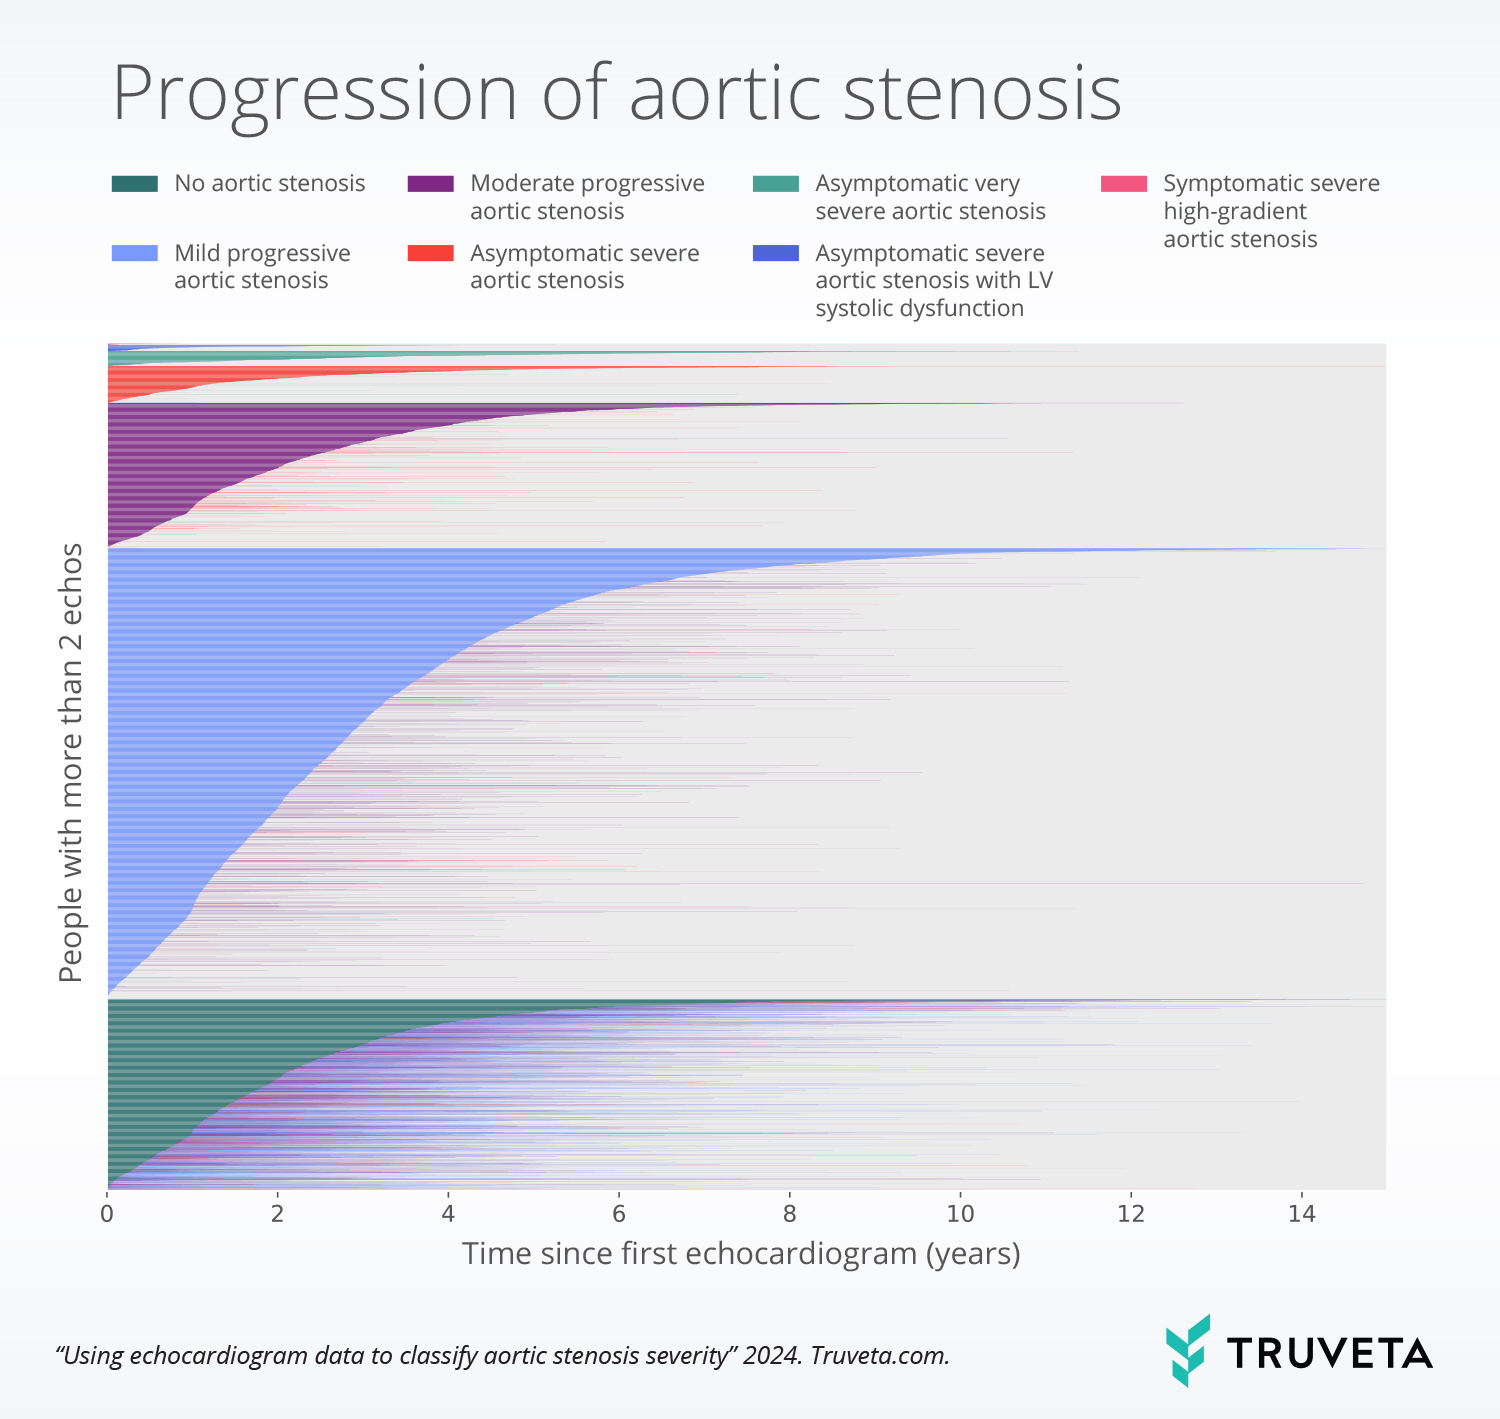 EHR data including echocardiogram observations are used to determine aortic stenosis severity